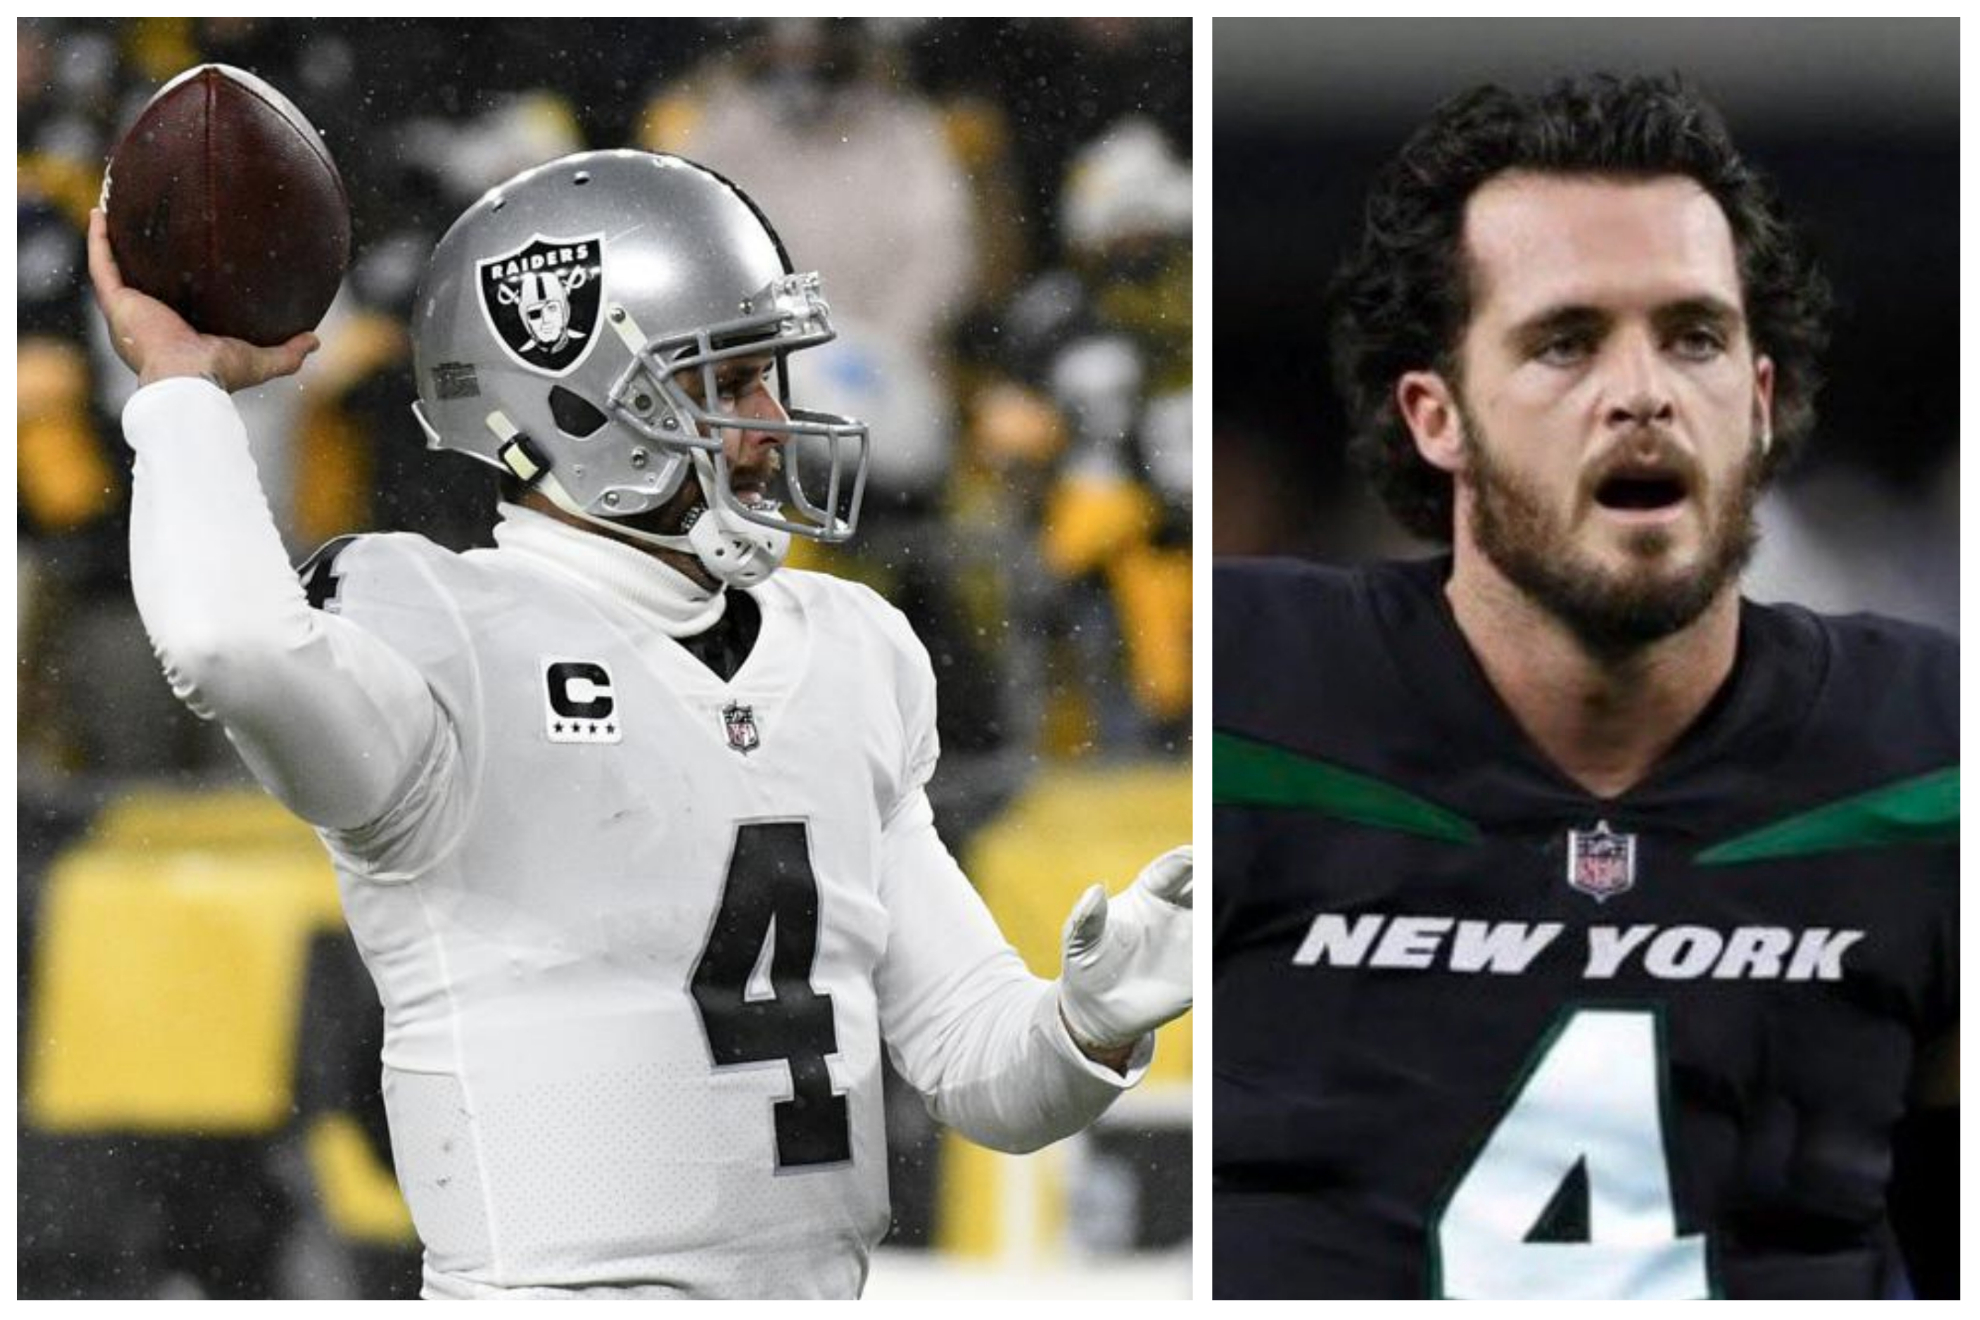 Derek Carr is a free agent after being released by the Las Vegas Raiders earlier this month.